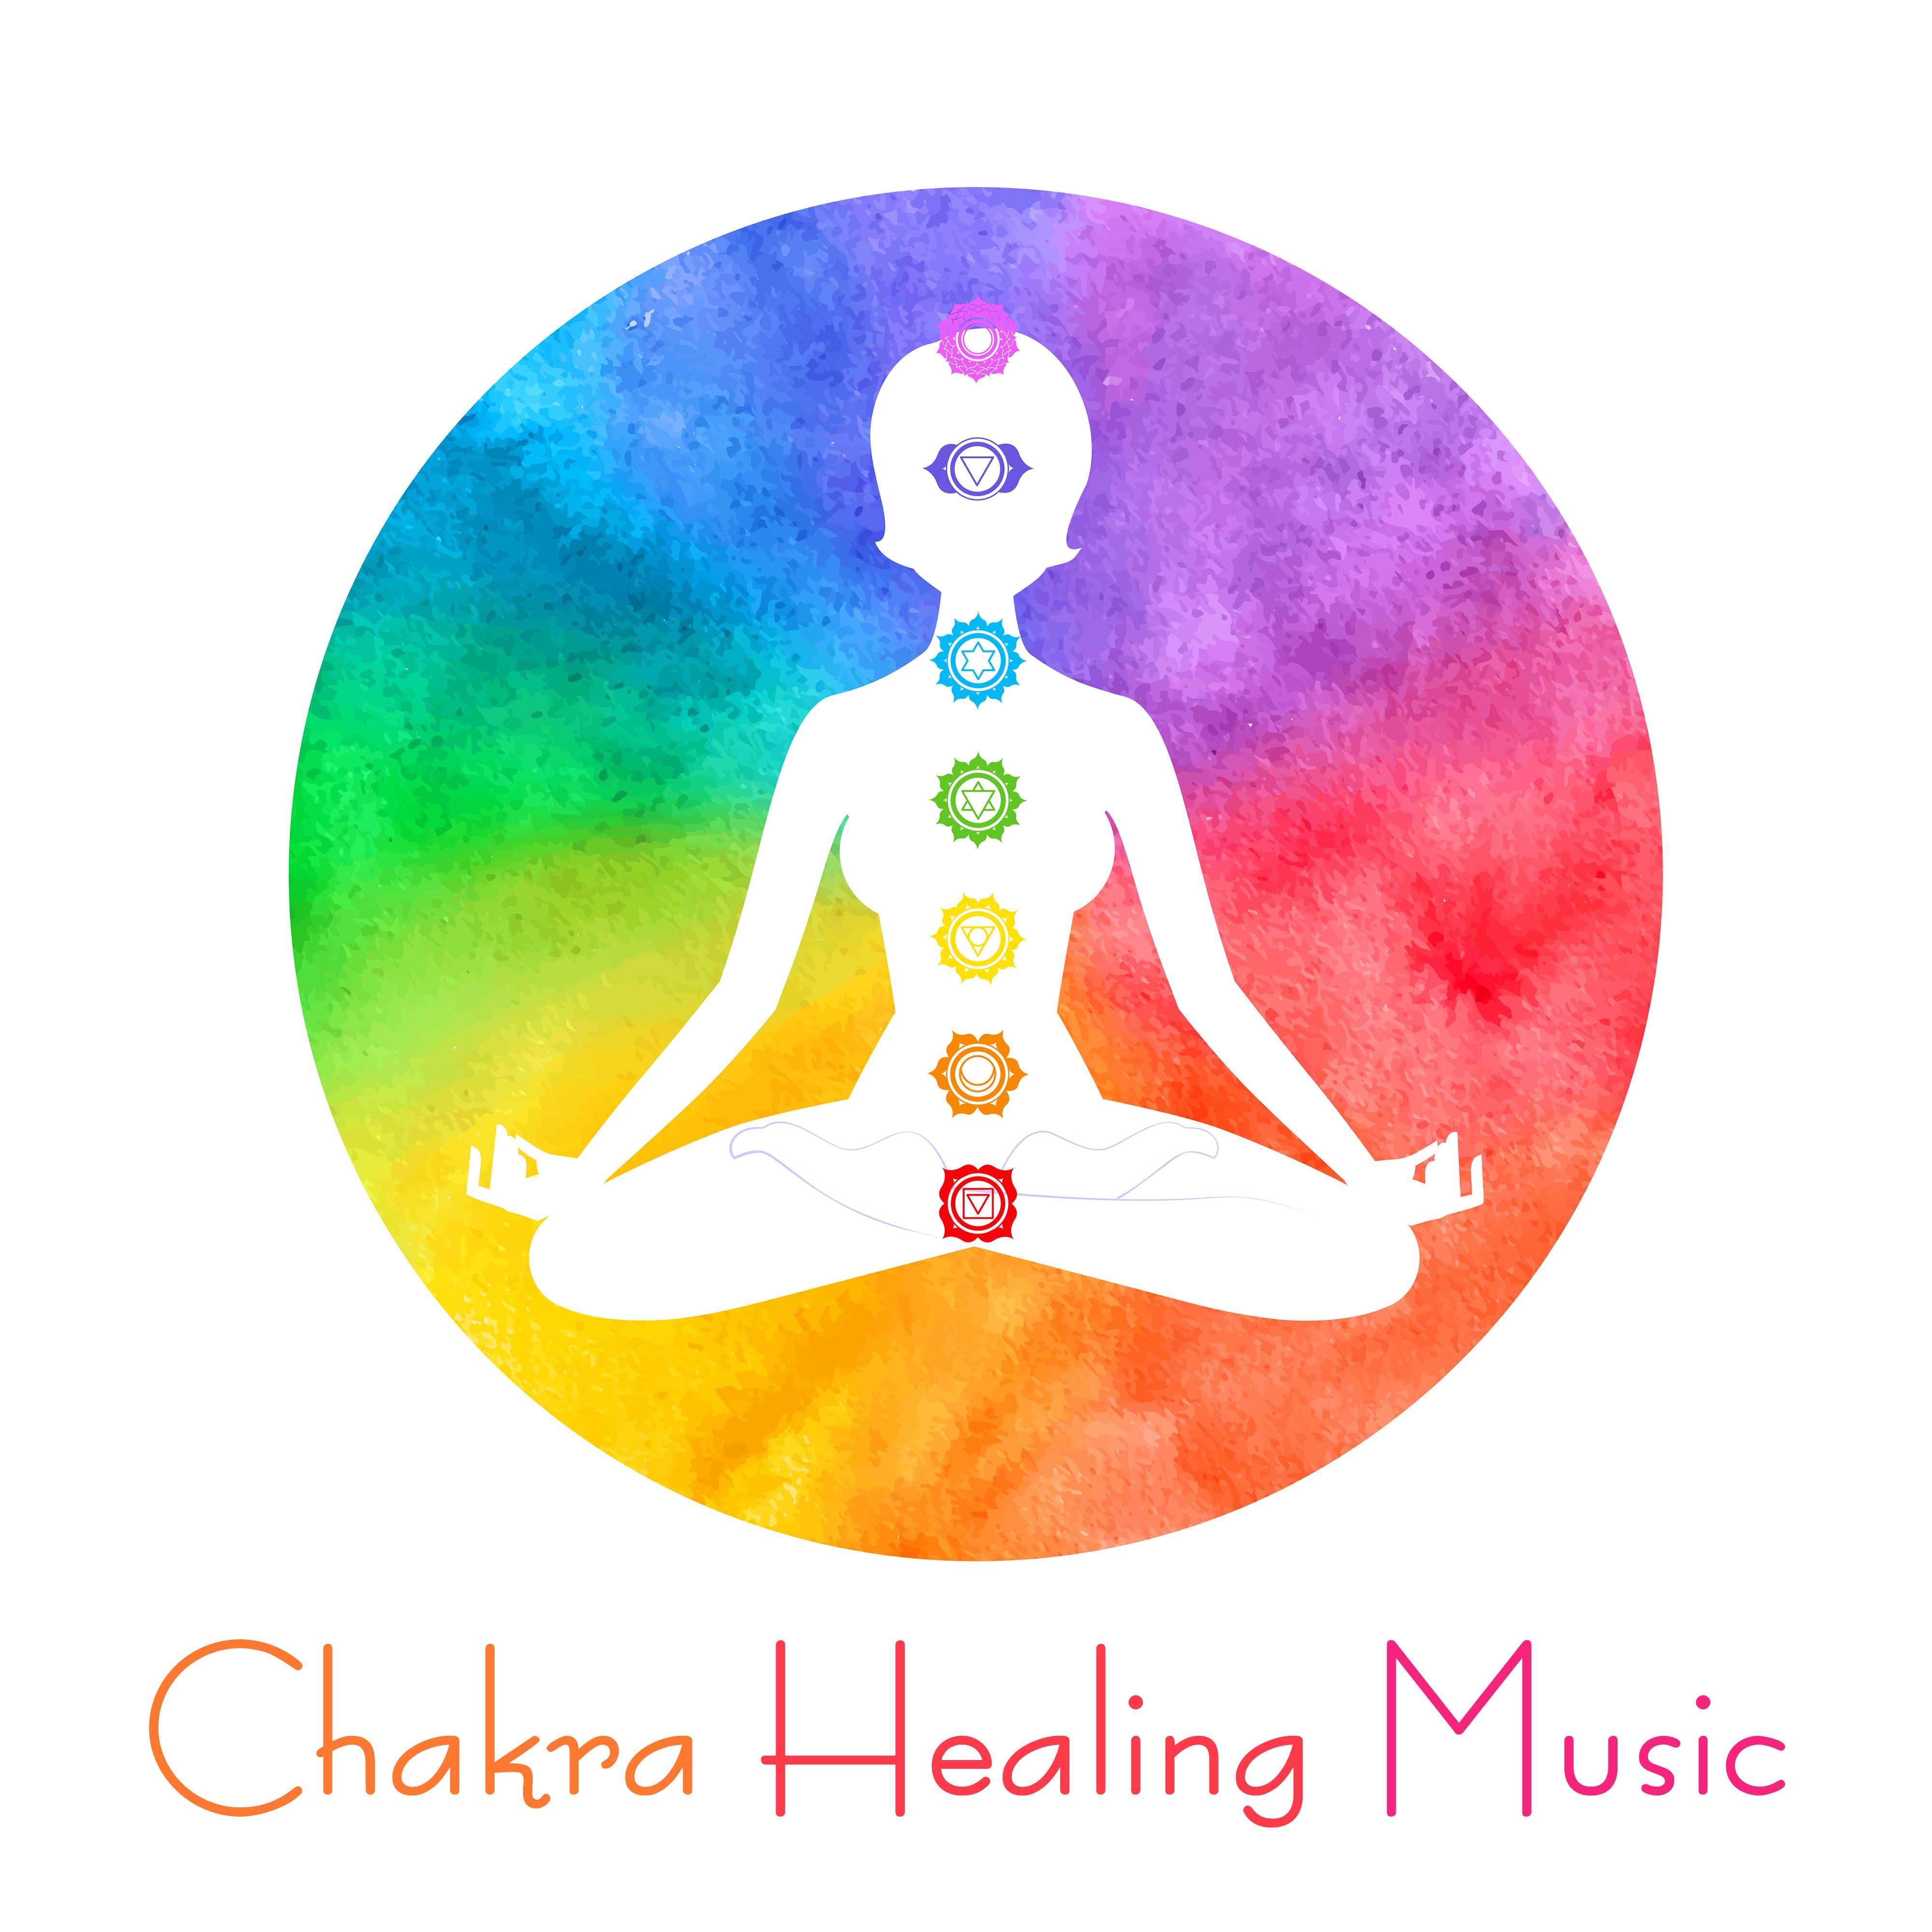 Chakra Healing Music: Meditation Therapy, Mindfulness Relaxation, Inner Balance, New Age Music to Calm Down, Inner Journey, Zen, Lounge